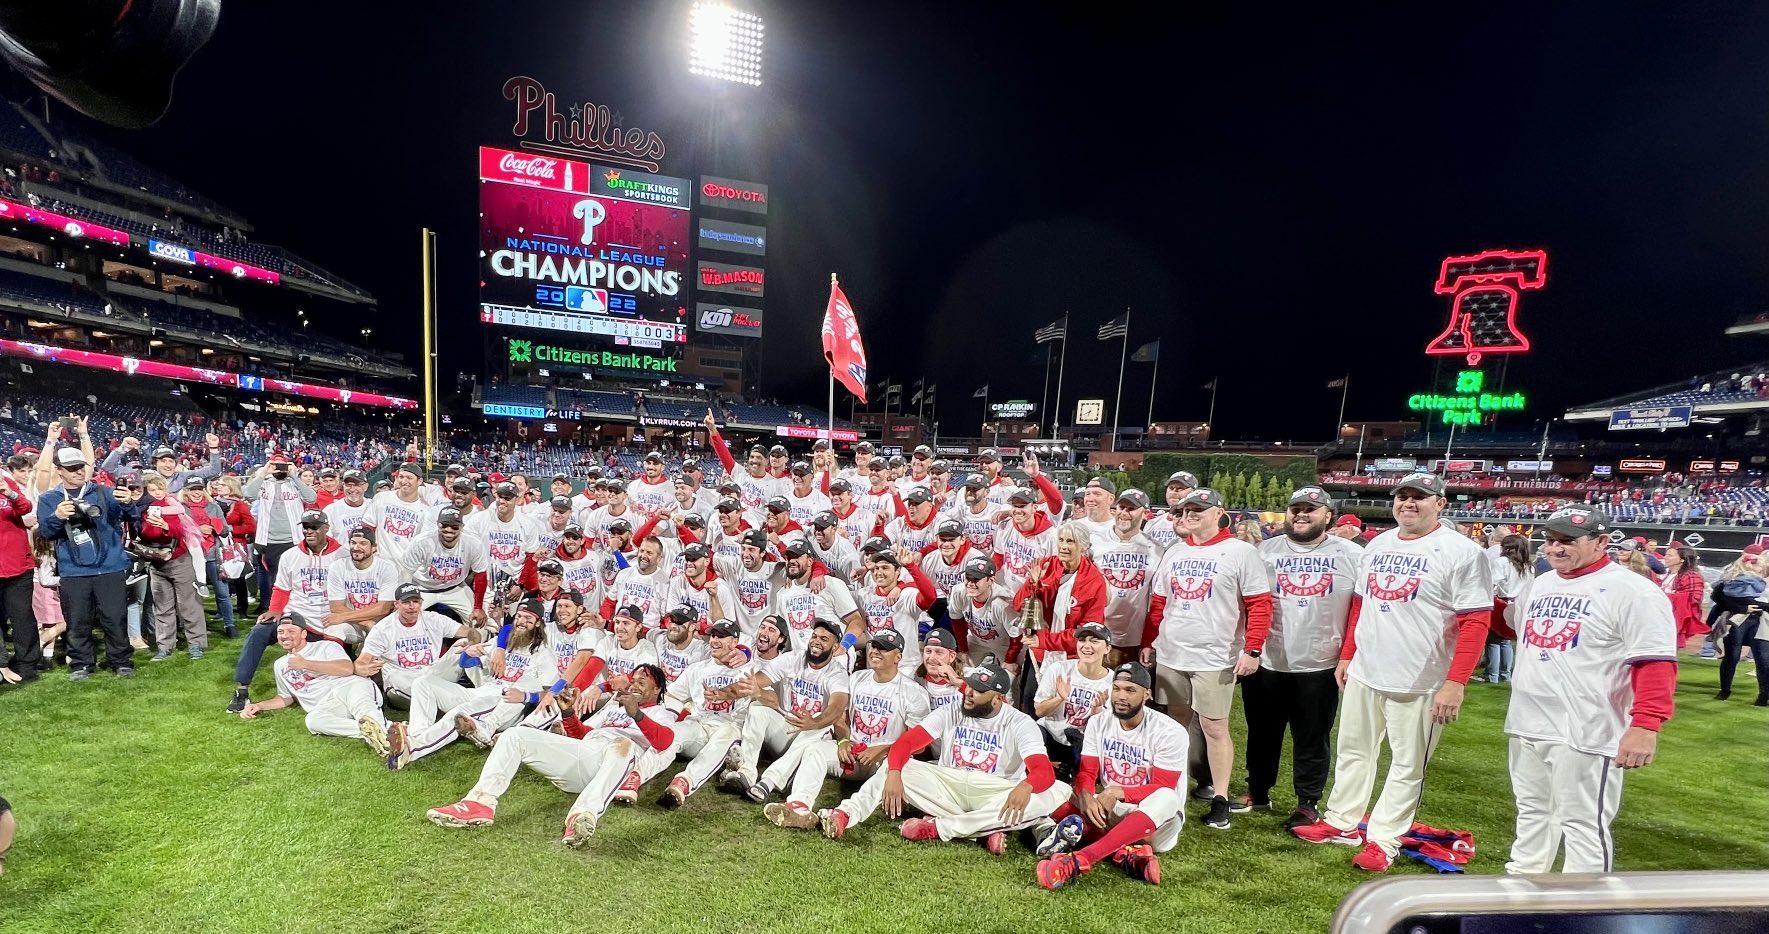 Jayson Stark on X: Your 2022 National League champions. The Phillies. Who  knew!  / X